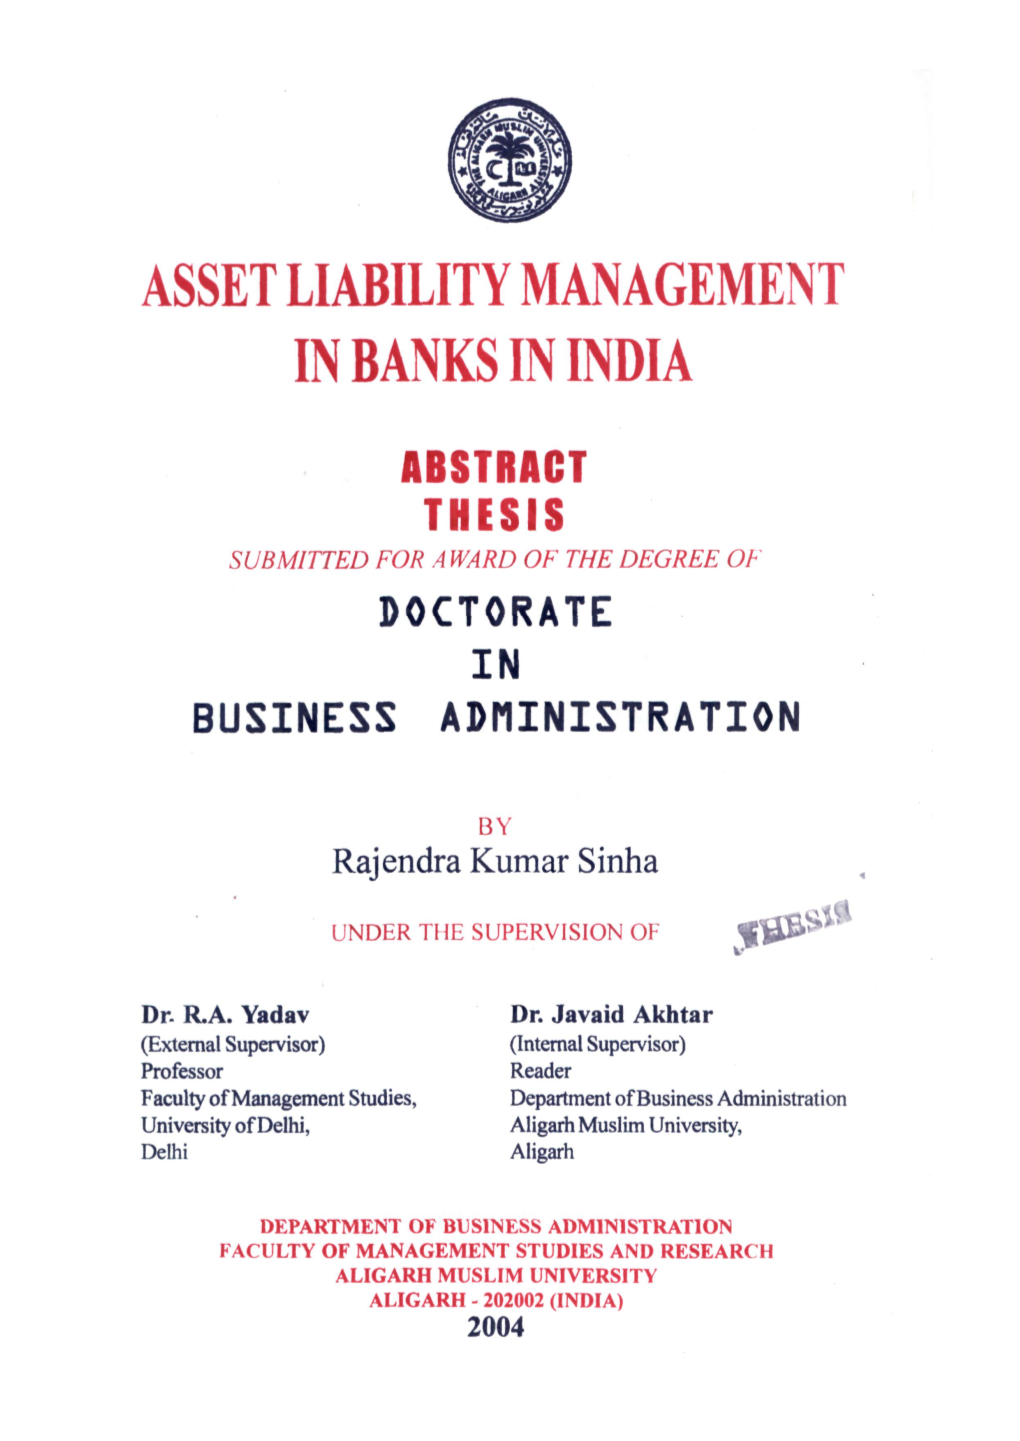 Asset Liability Management in Banks in India